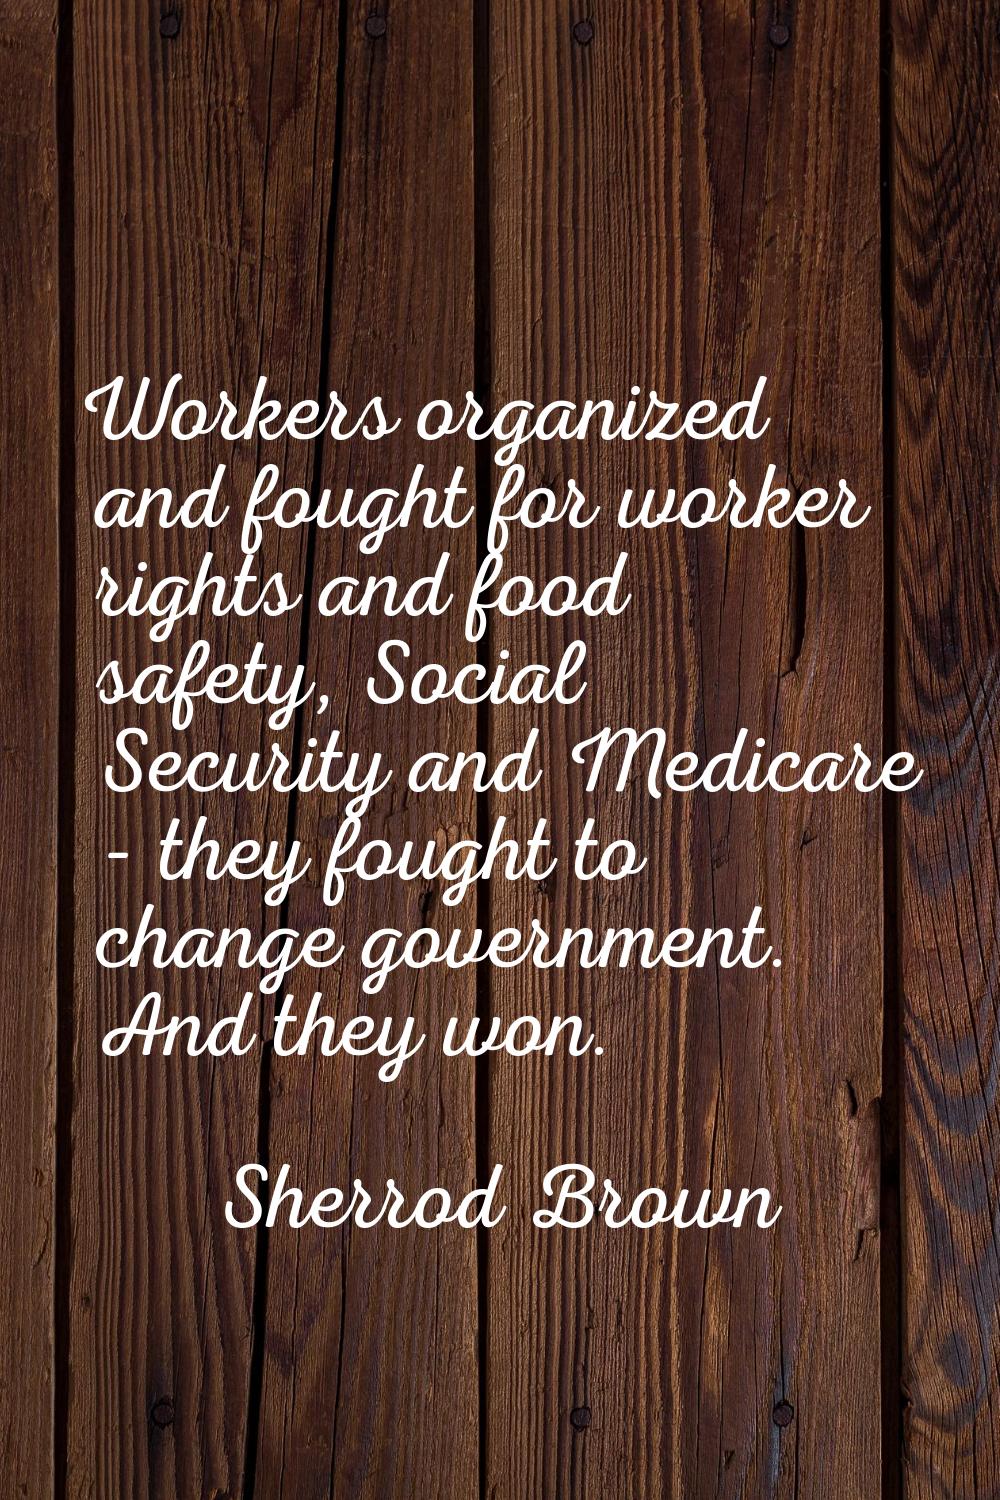 Workers organized and fought for worker rights and food safety, Social Security and Medicare - they